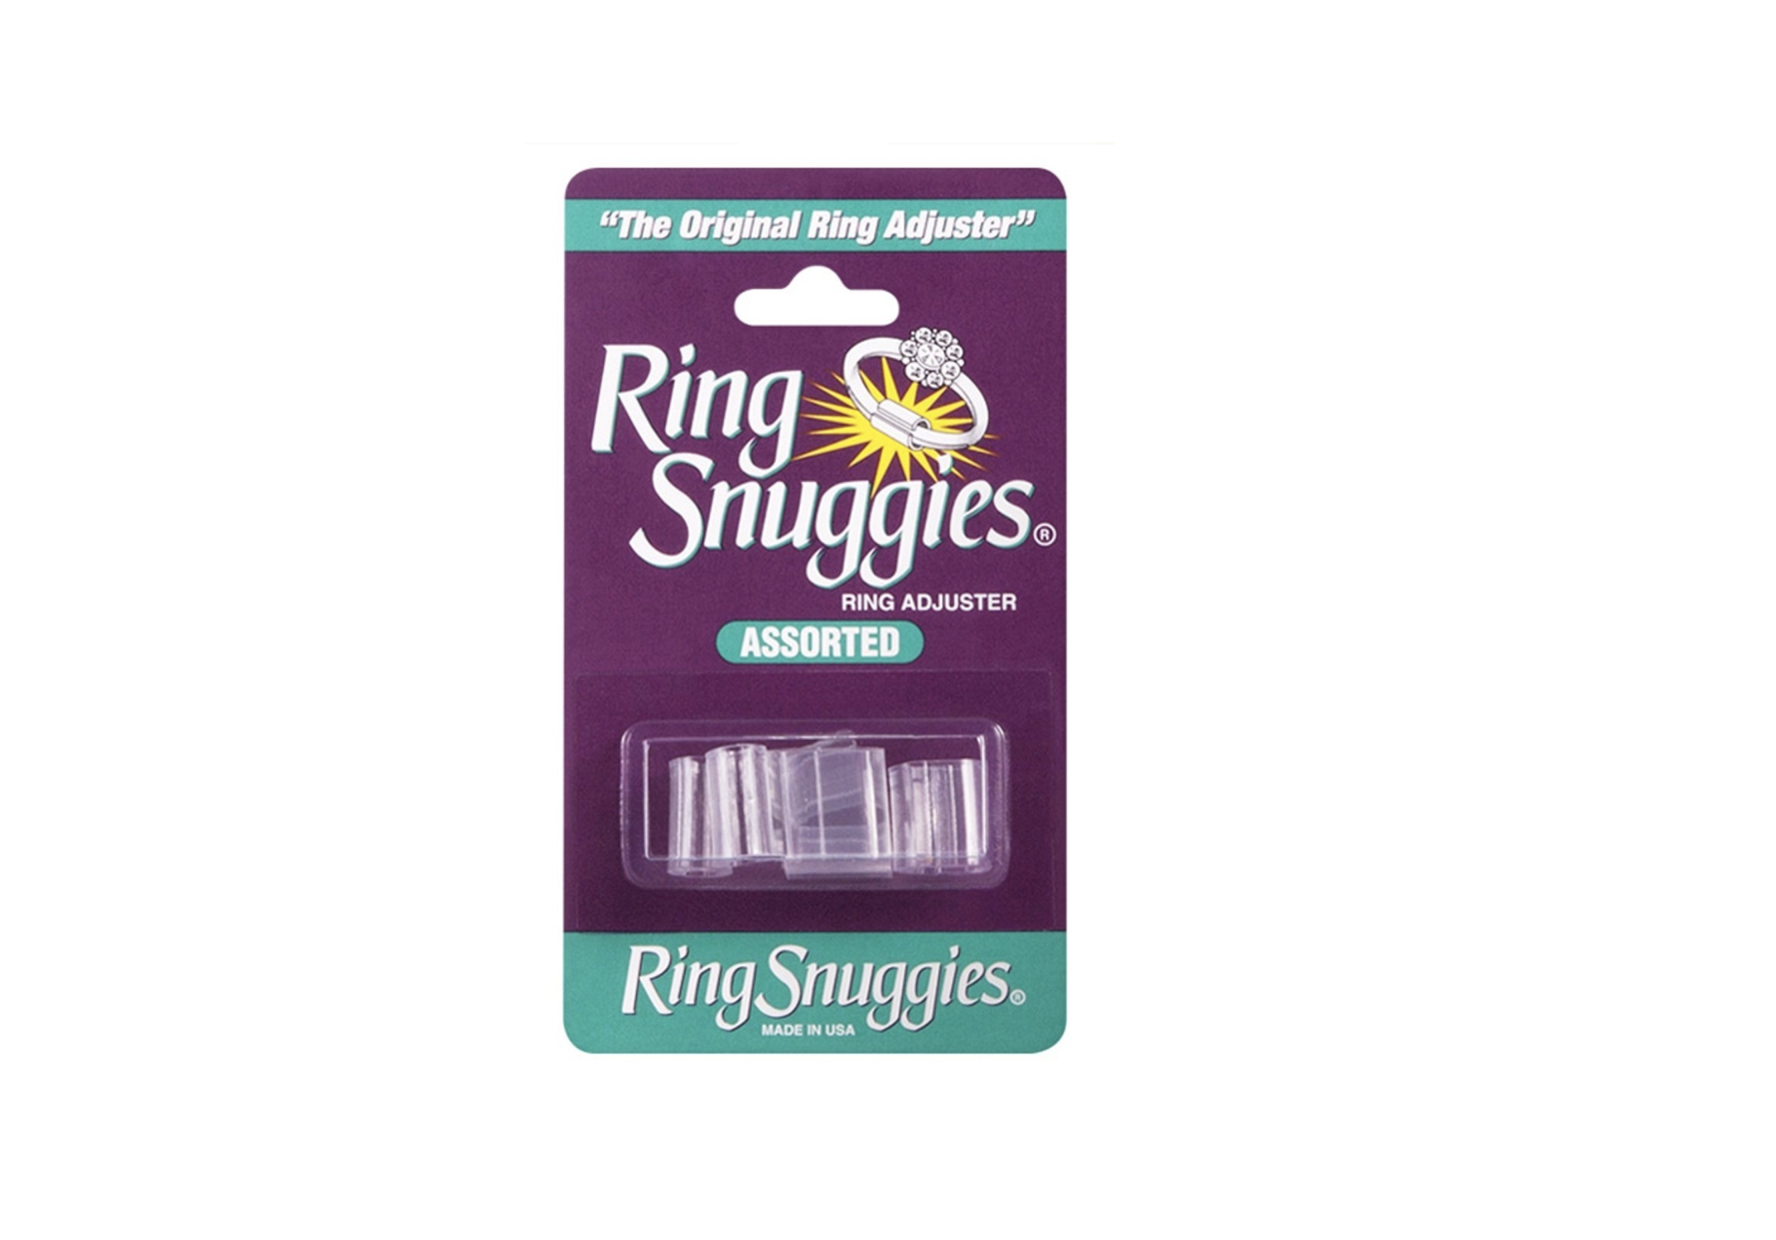 Ring Snuggies PACK = 6 pc ASSORTED SIZES including !!!EX-WIDE